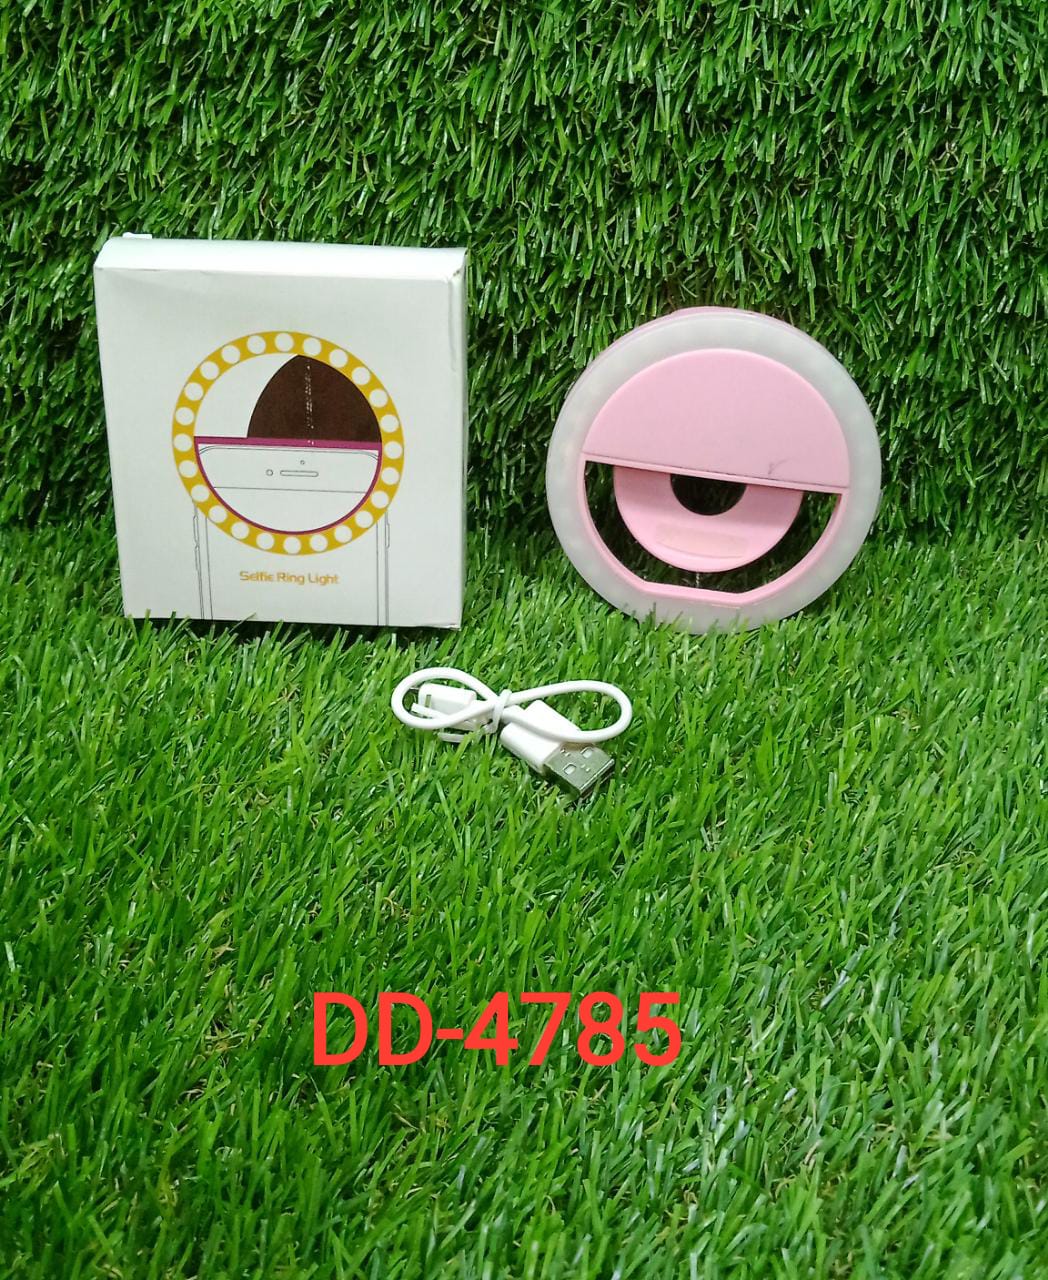 4785 Selfie Ring Light used for applying bright shade over face during taking selfies and making videos etc. DeoDap